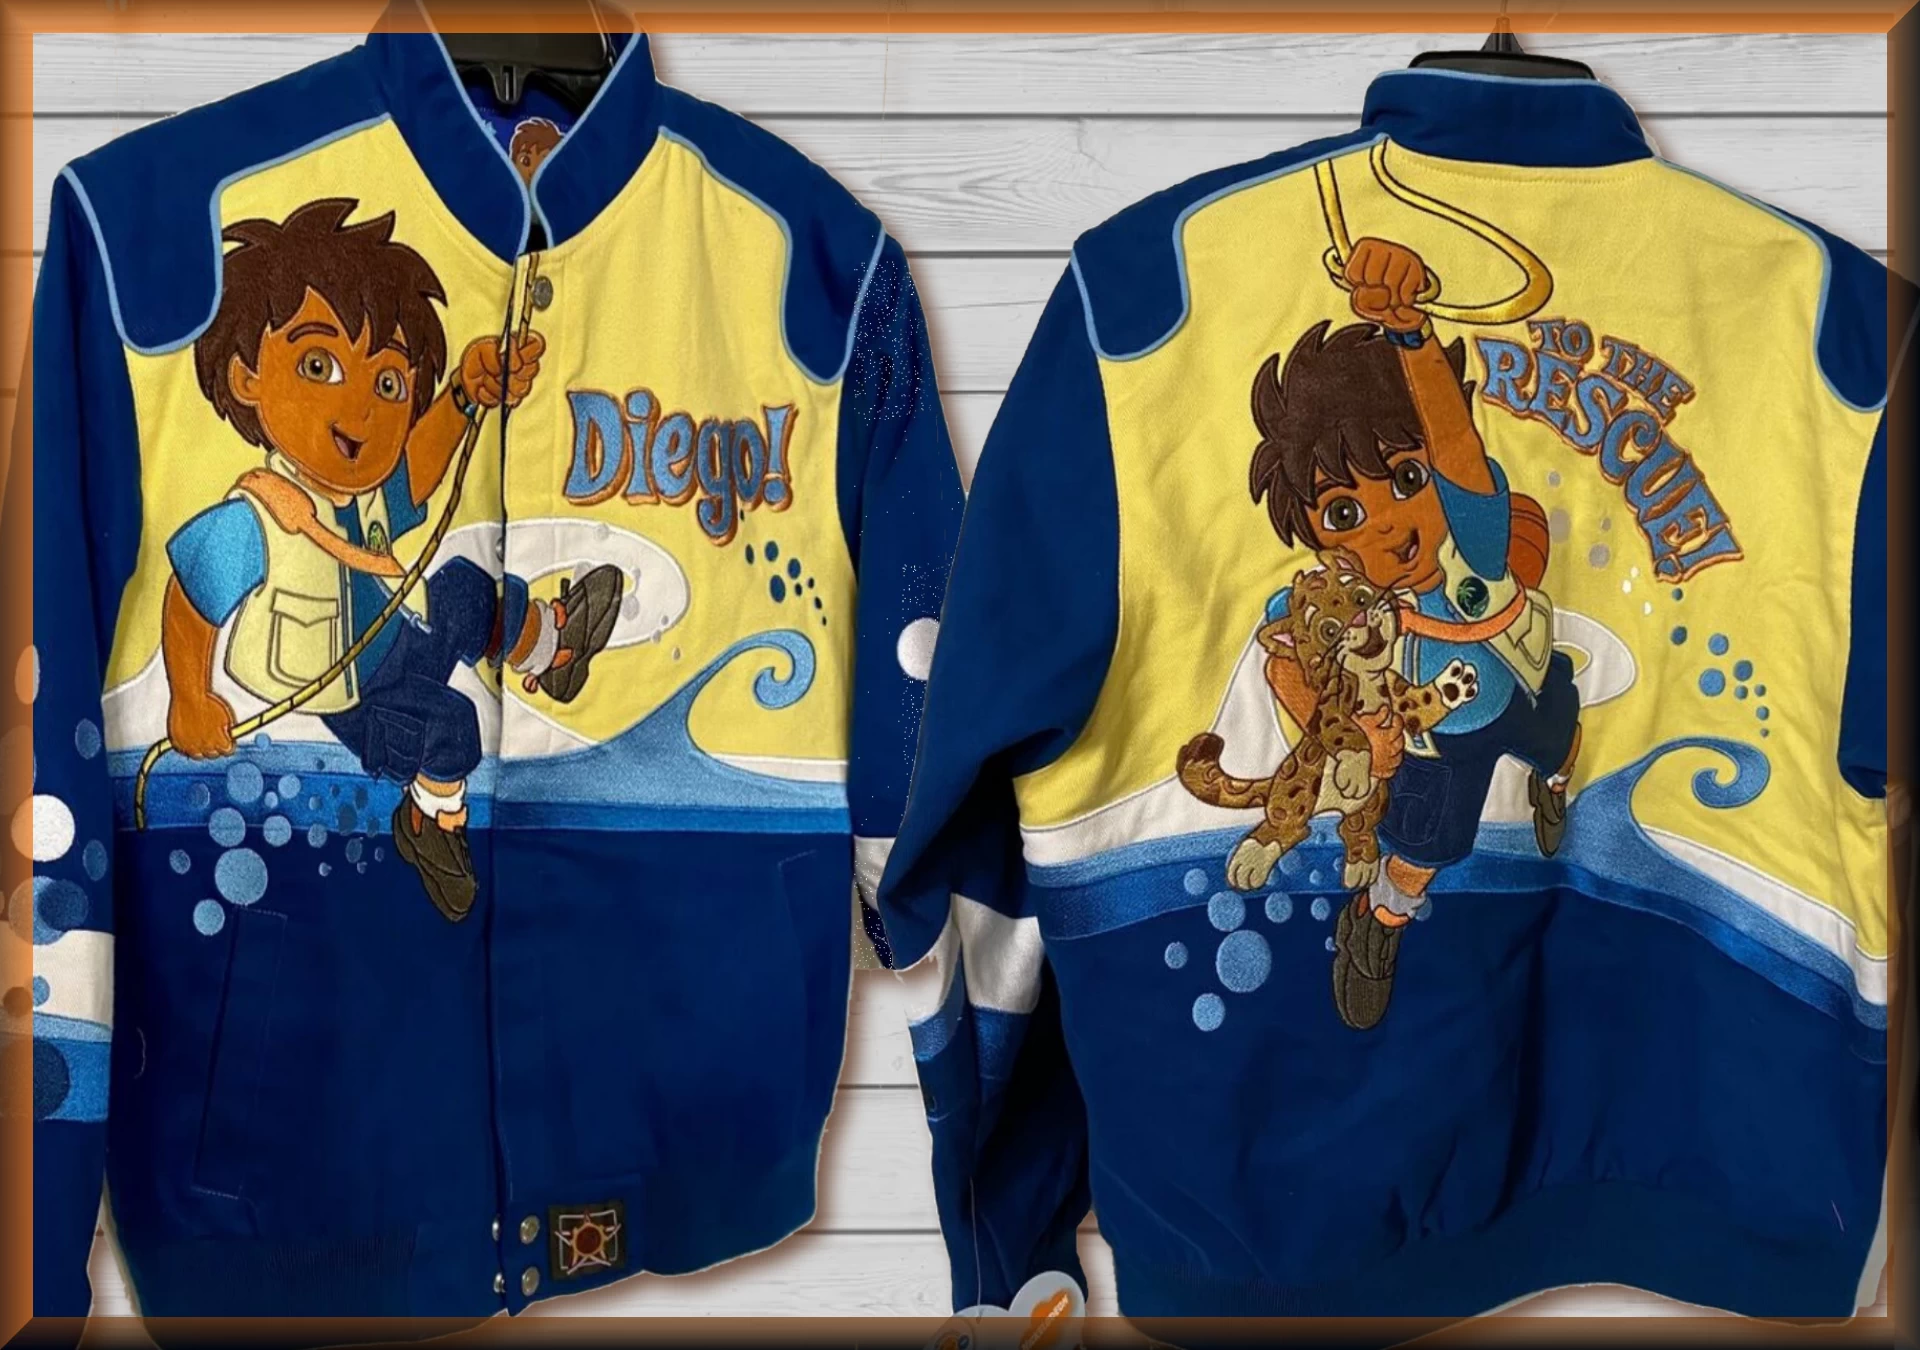 Diego Blue Kids Cartoon Character Jacket by JH Design